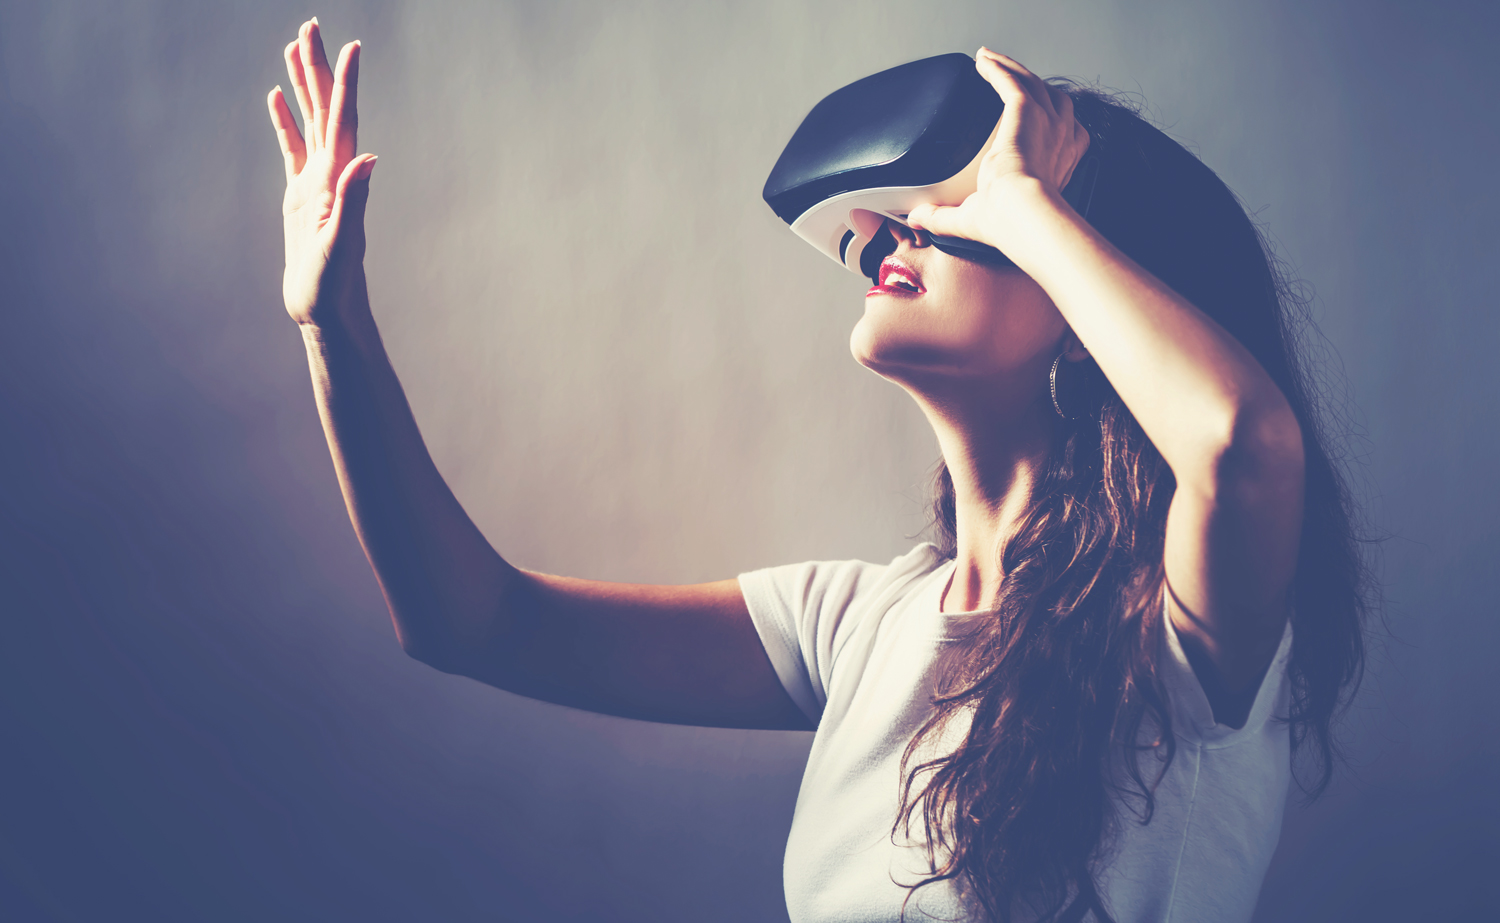 6 Doubts About Virtual Reality You Should Clarify